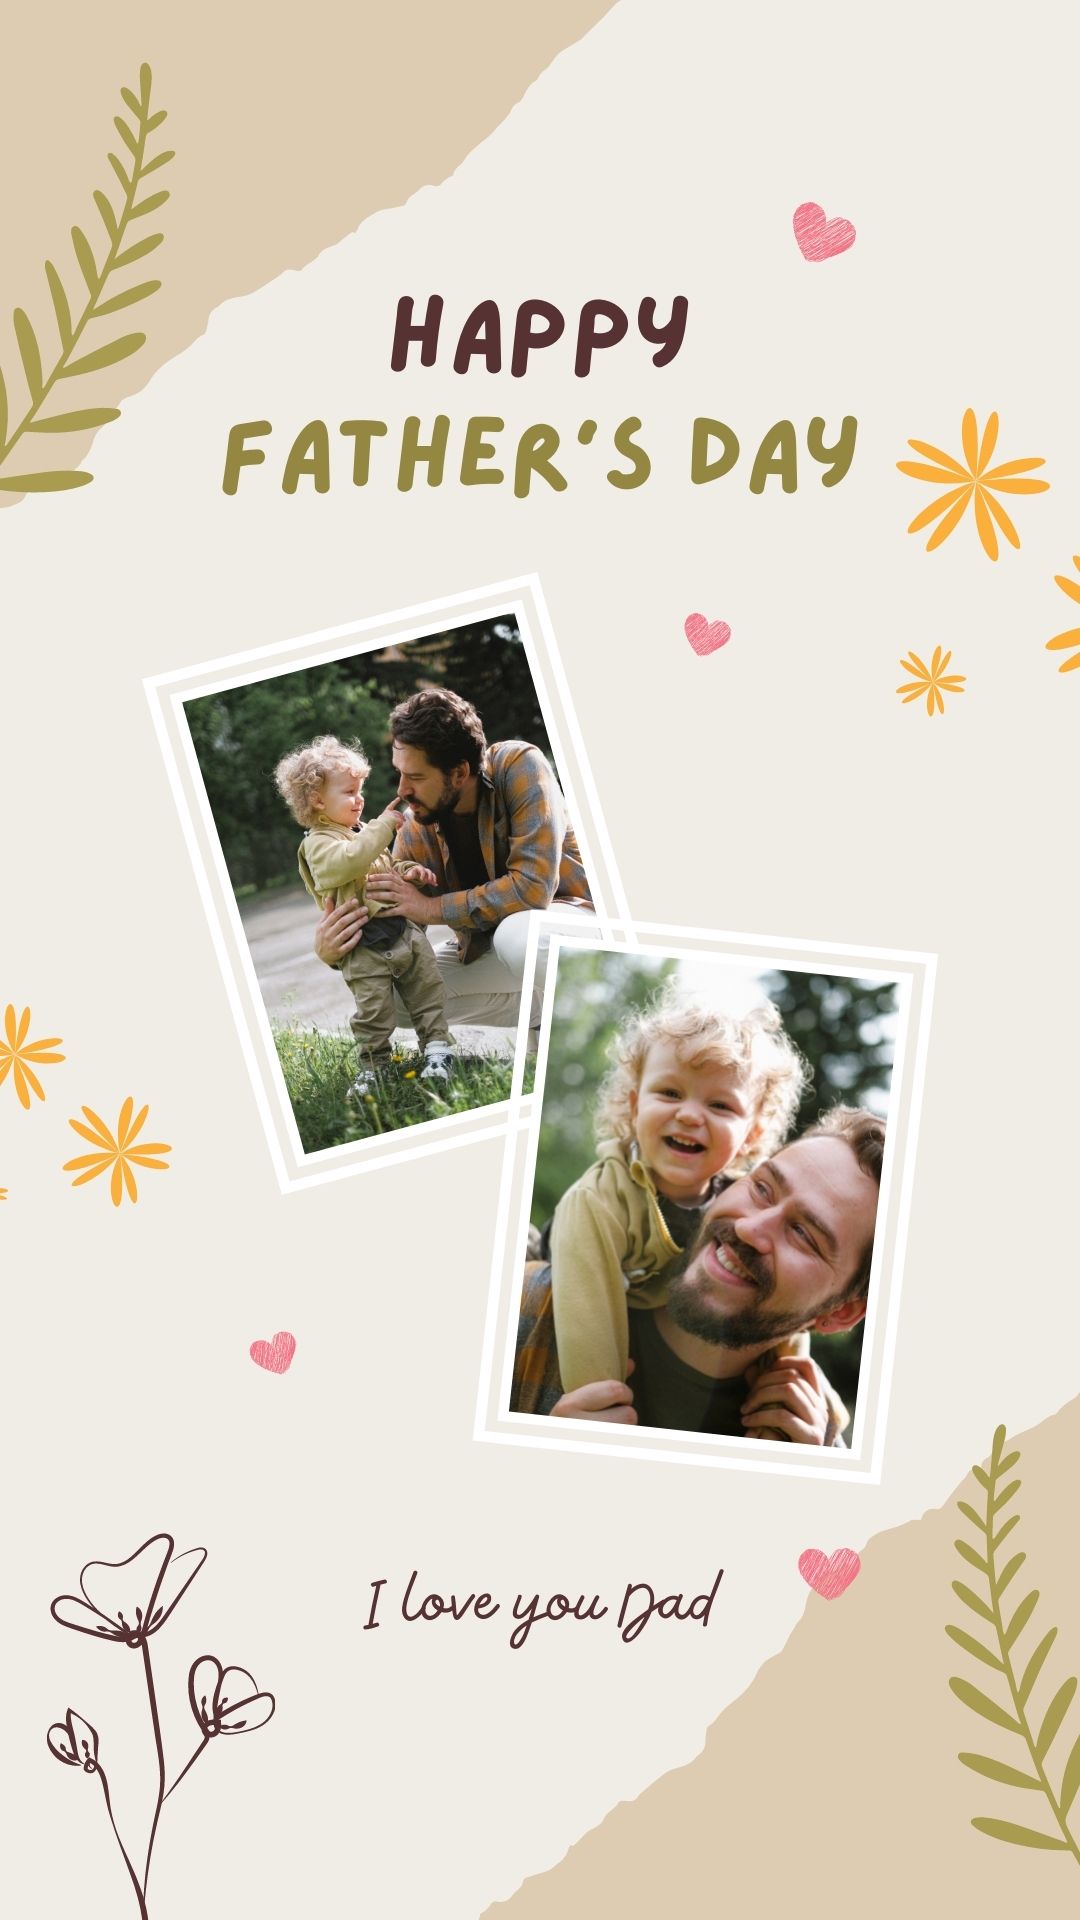 best happy father's day wishes images for instagram story (21)